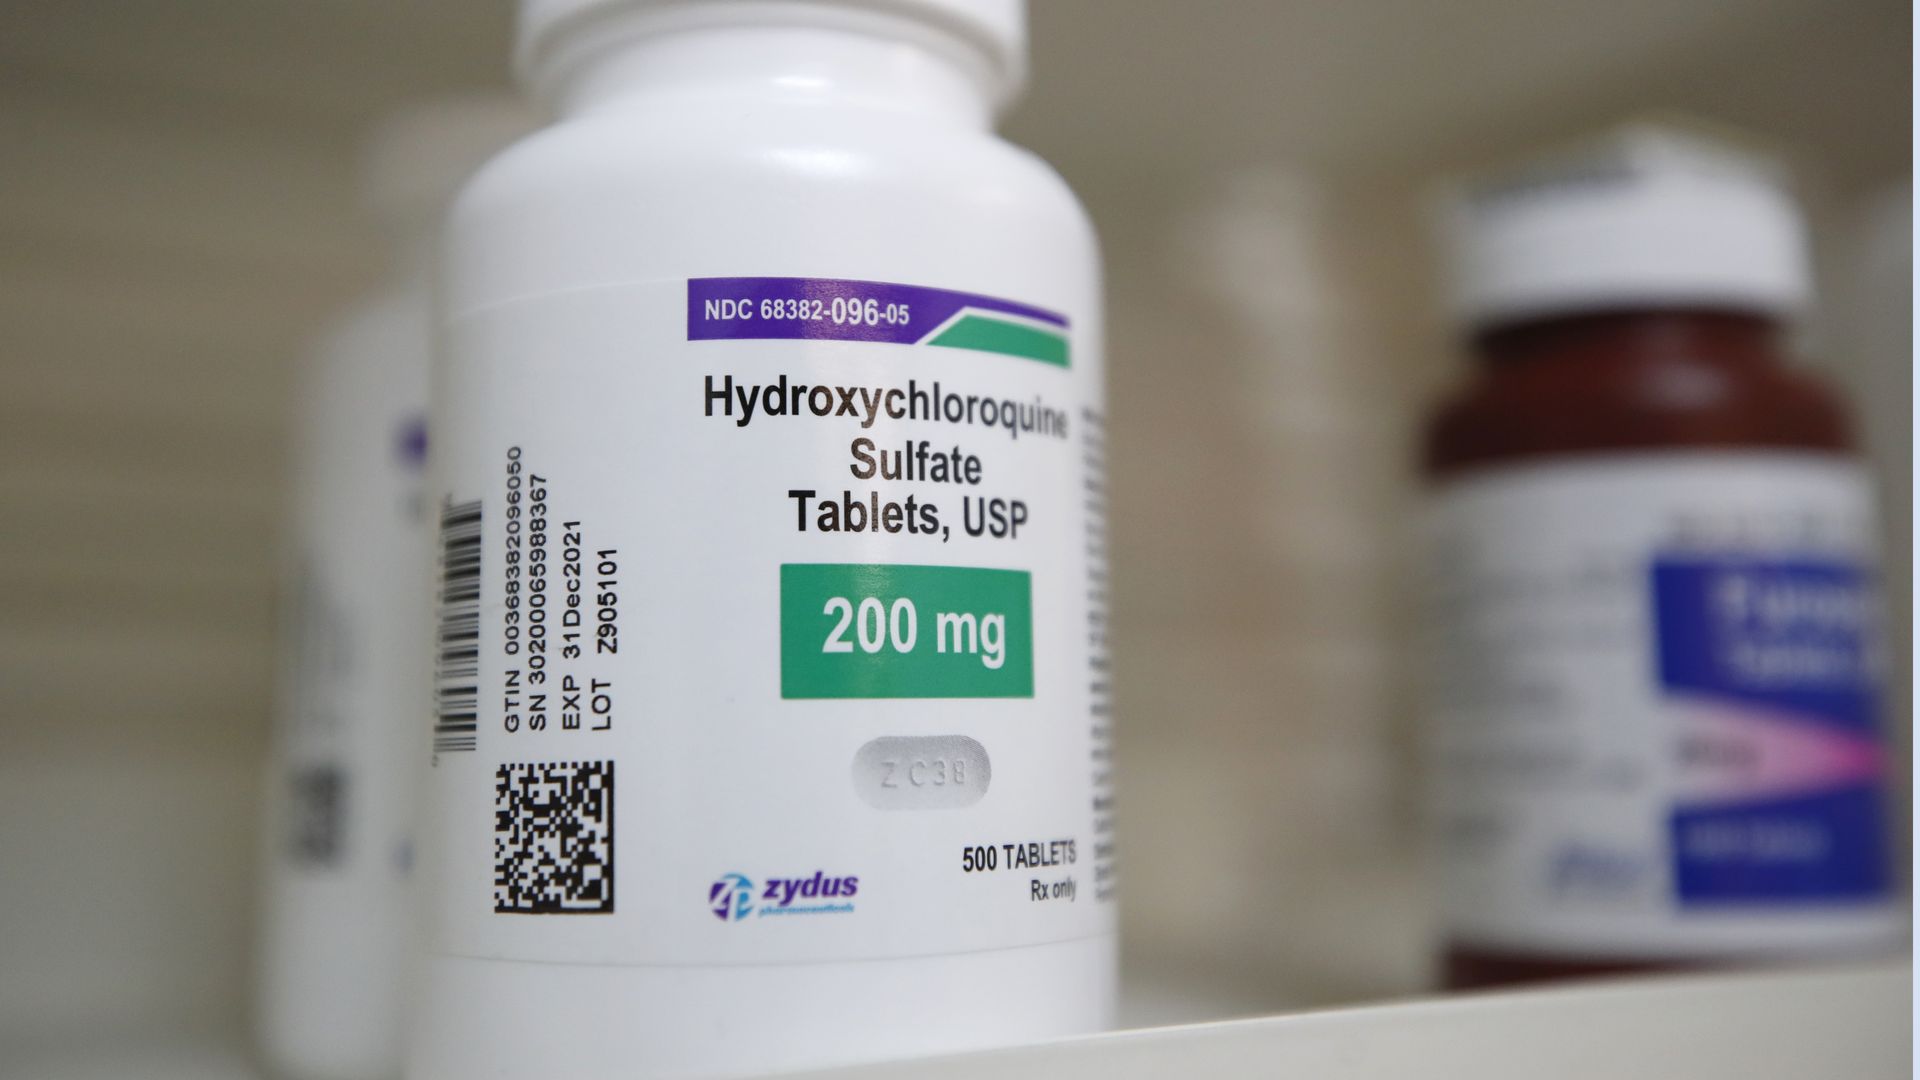 Medical journal retracts study that fueled hydroxychloroquine concerns